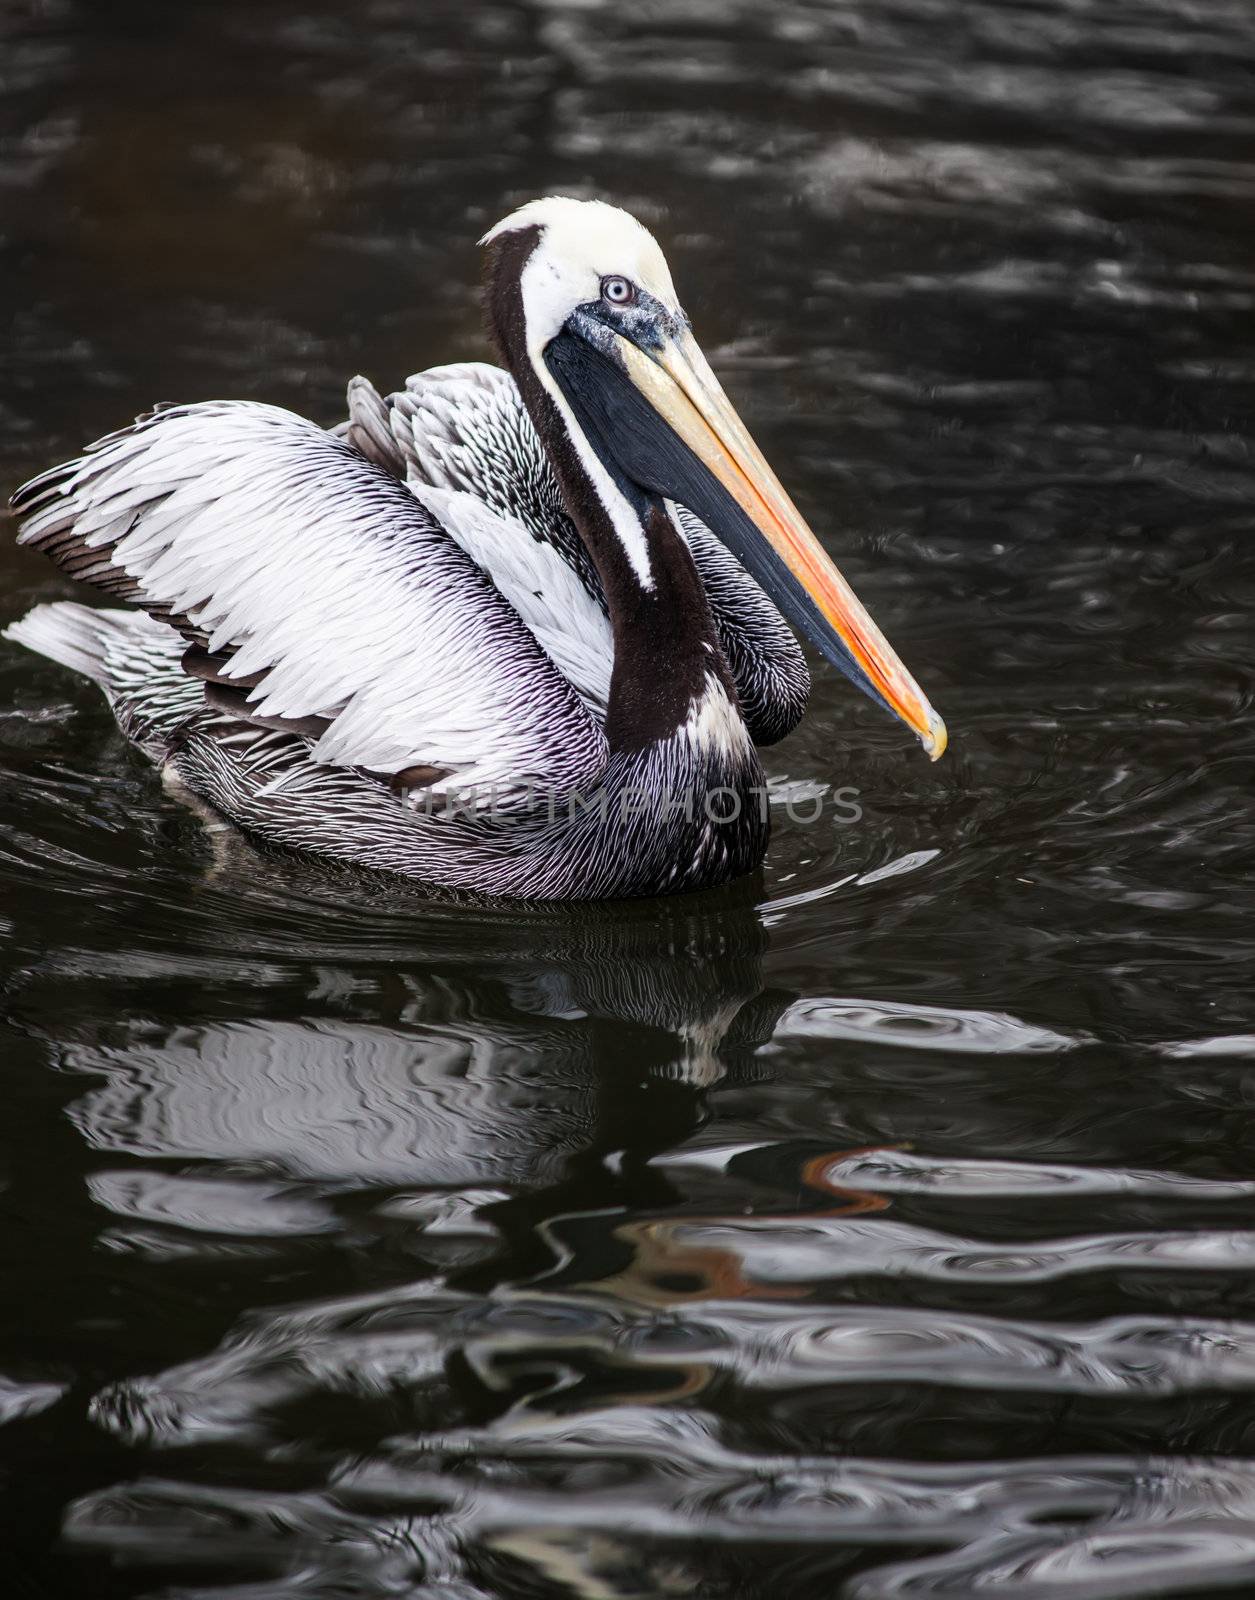 Peruvian Pelican: birds from South America   by Arsgera